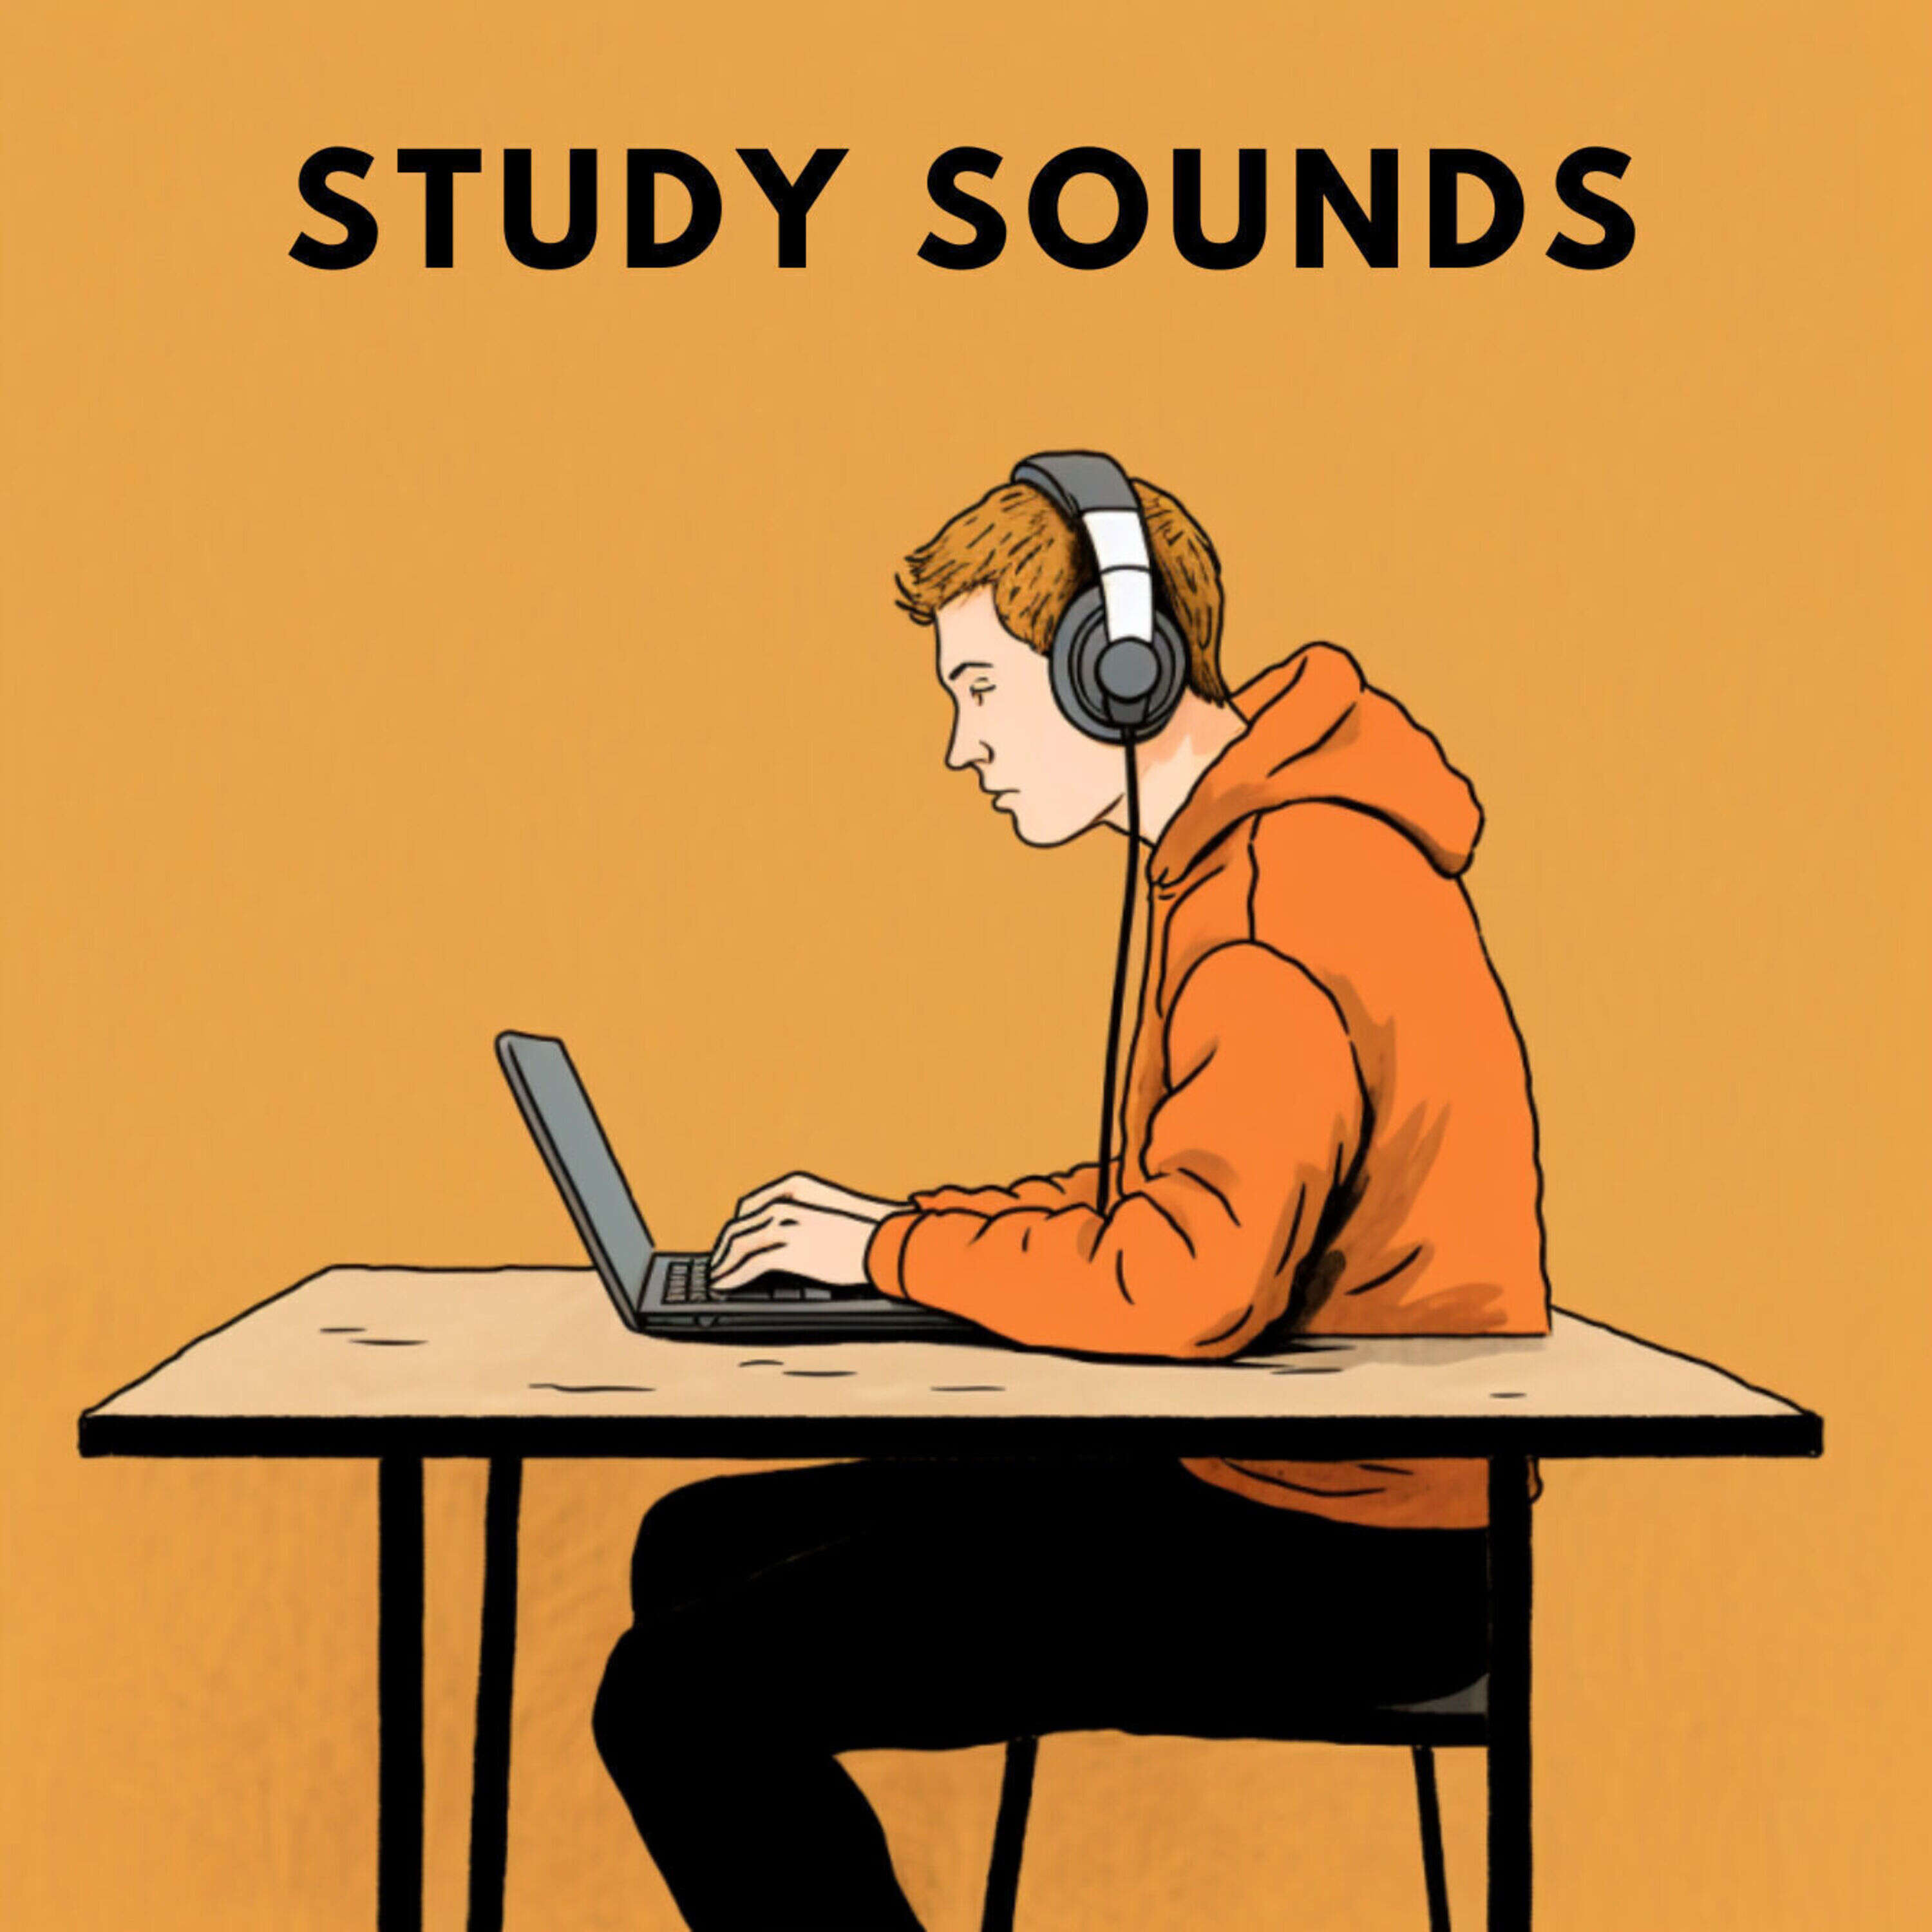 Rainy Sounds Cafe - Slow Sounds in Coffee Shop Ambience for Work, Study and Relaxation